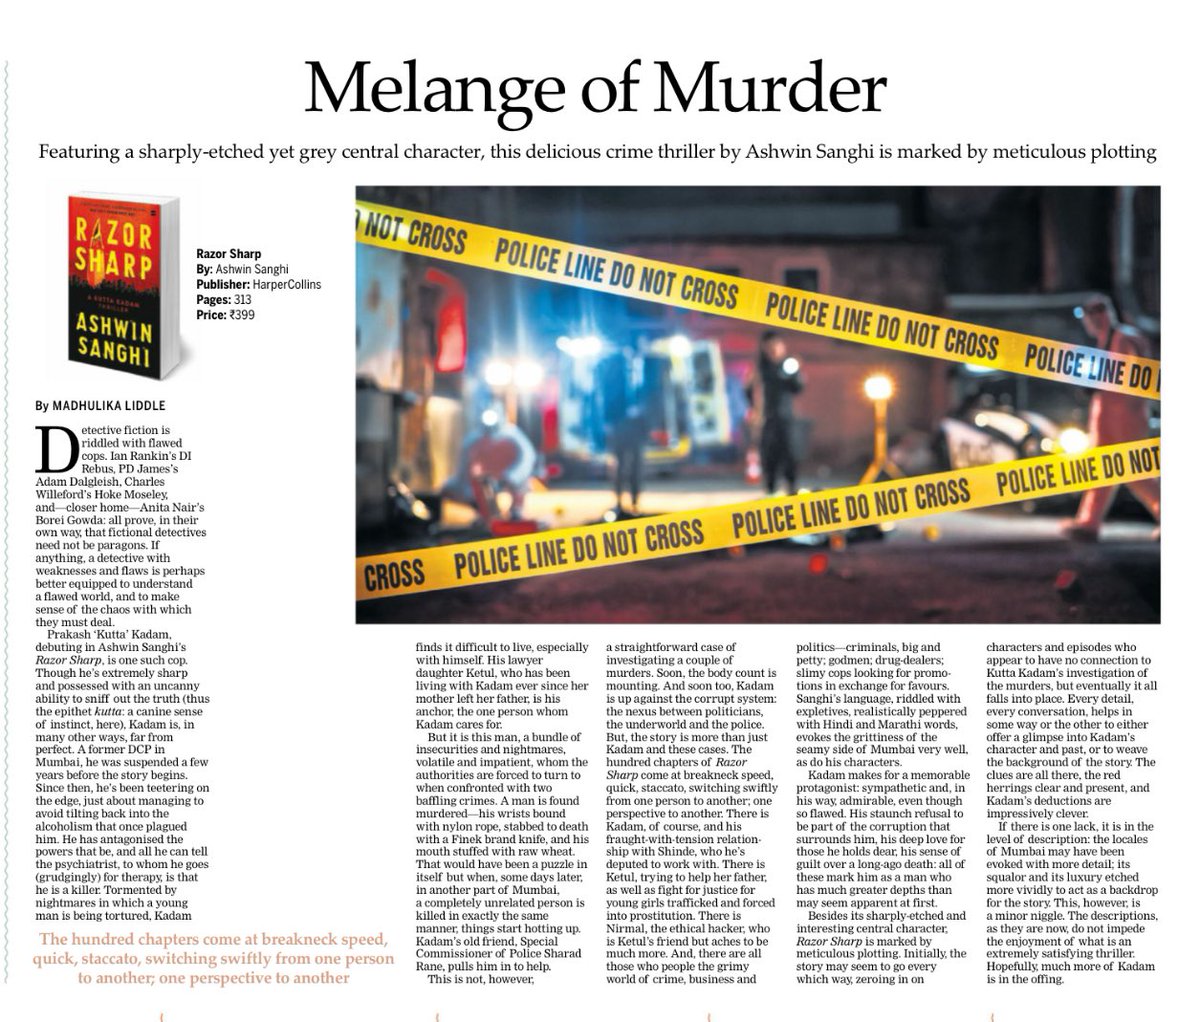 #RazorSharp book review by @newindianexpress Melange of Murder: “Featuring a sharply etched yet grey central character, this delicious crime thriller by Ashwin Sanghi is marked by meticulous plotting.” Link newindianexpress.com/books/2024/Apr…